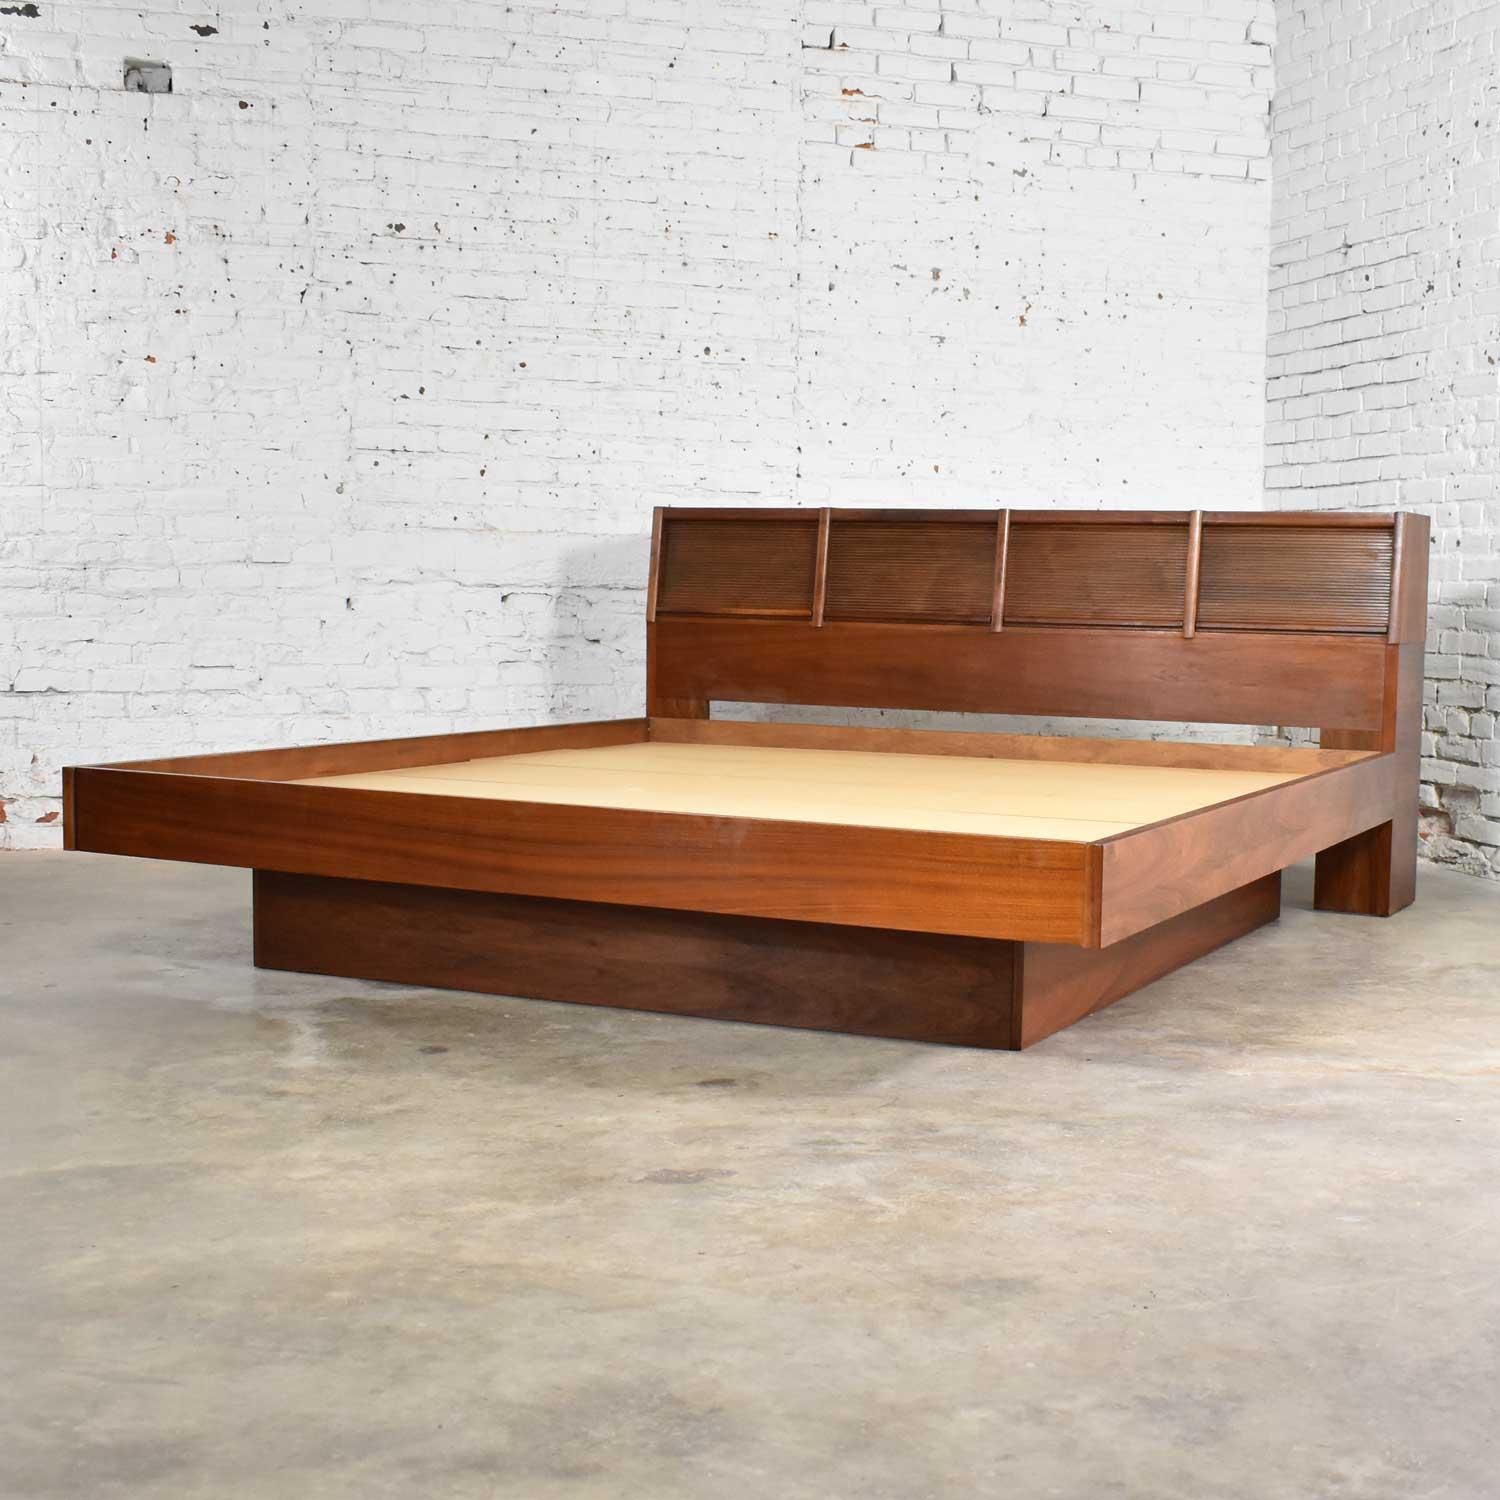 Handsome king size Scandinavian Modern style walnut platform bed with bookcase headboard and tambour doors plus wall mount shelf bedside tables, by Barzilay Furniture Manufacturing Company. It is in fabulous vintage condition with no outstanding